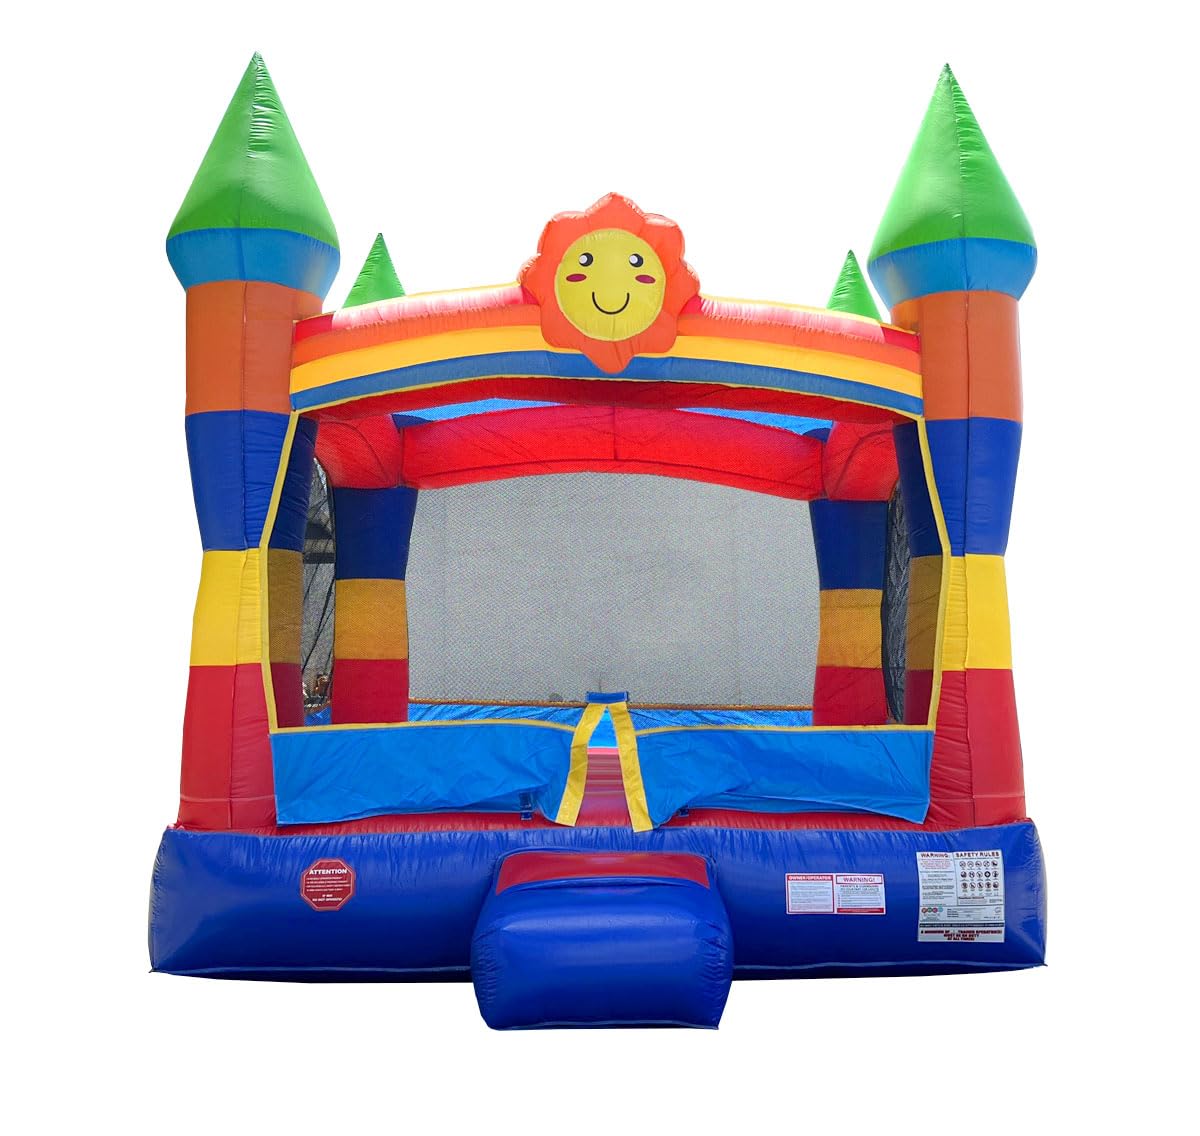 Pogo Bounce House Crossover Inflatable Bounce - Commercial Grade Party Playhouse Rainbow Smiley Face Unit & Blower - for Kids - Backyard Outdoor Jump Fun - W/Stakes & Storage Bag 13x12x14.5ft